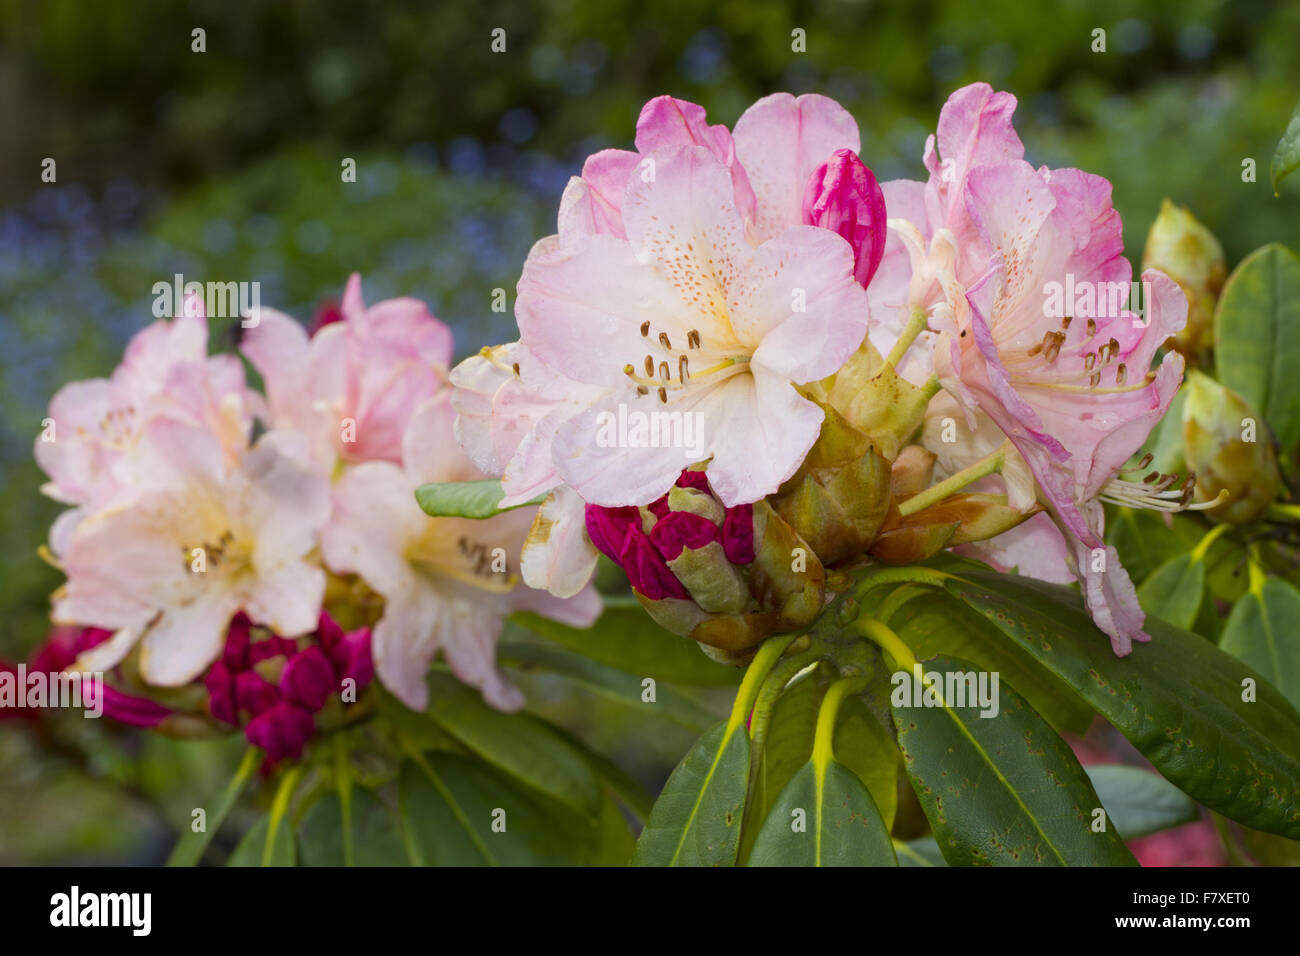 Cultivated Rhododendron (Rhododendron sp.) 'Percy Wiseman', close-up of flowers, growing in garden, Powys, Wales, May Stock Photo